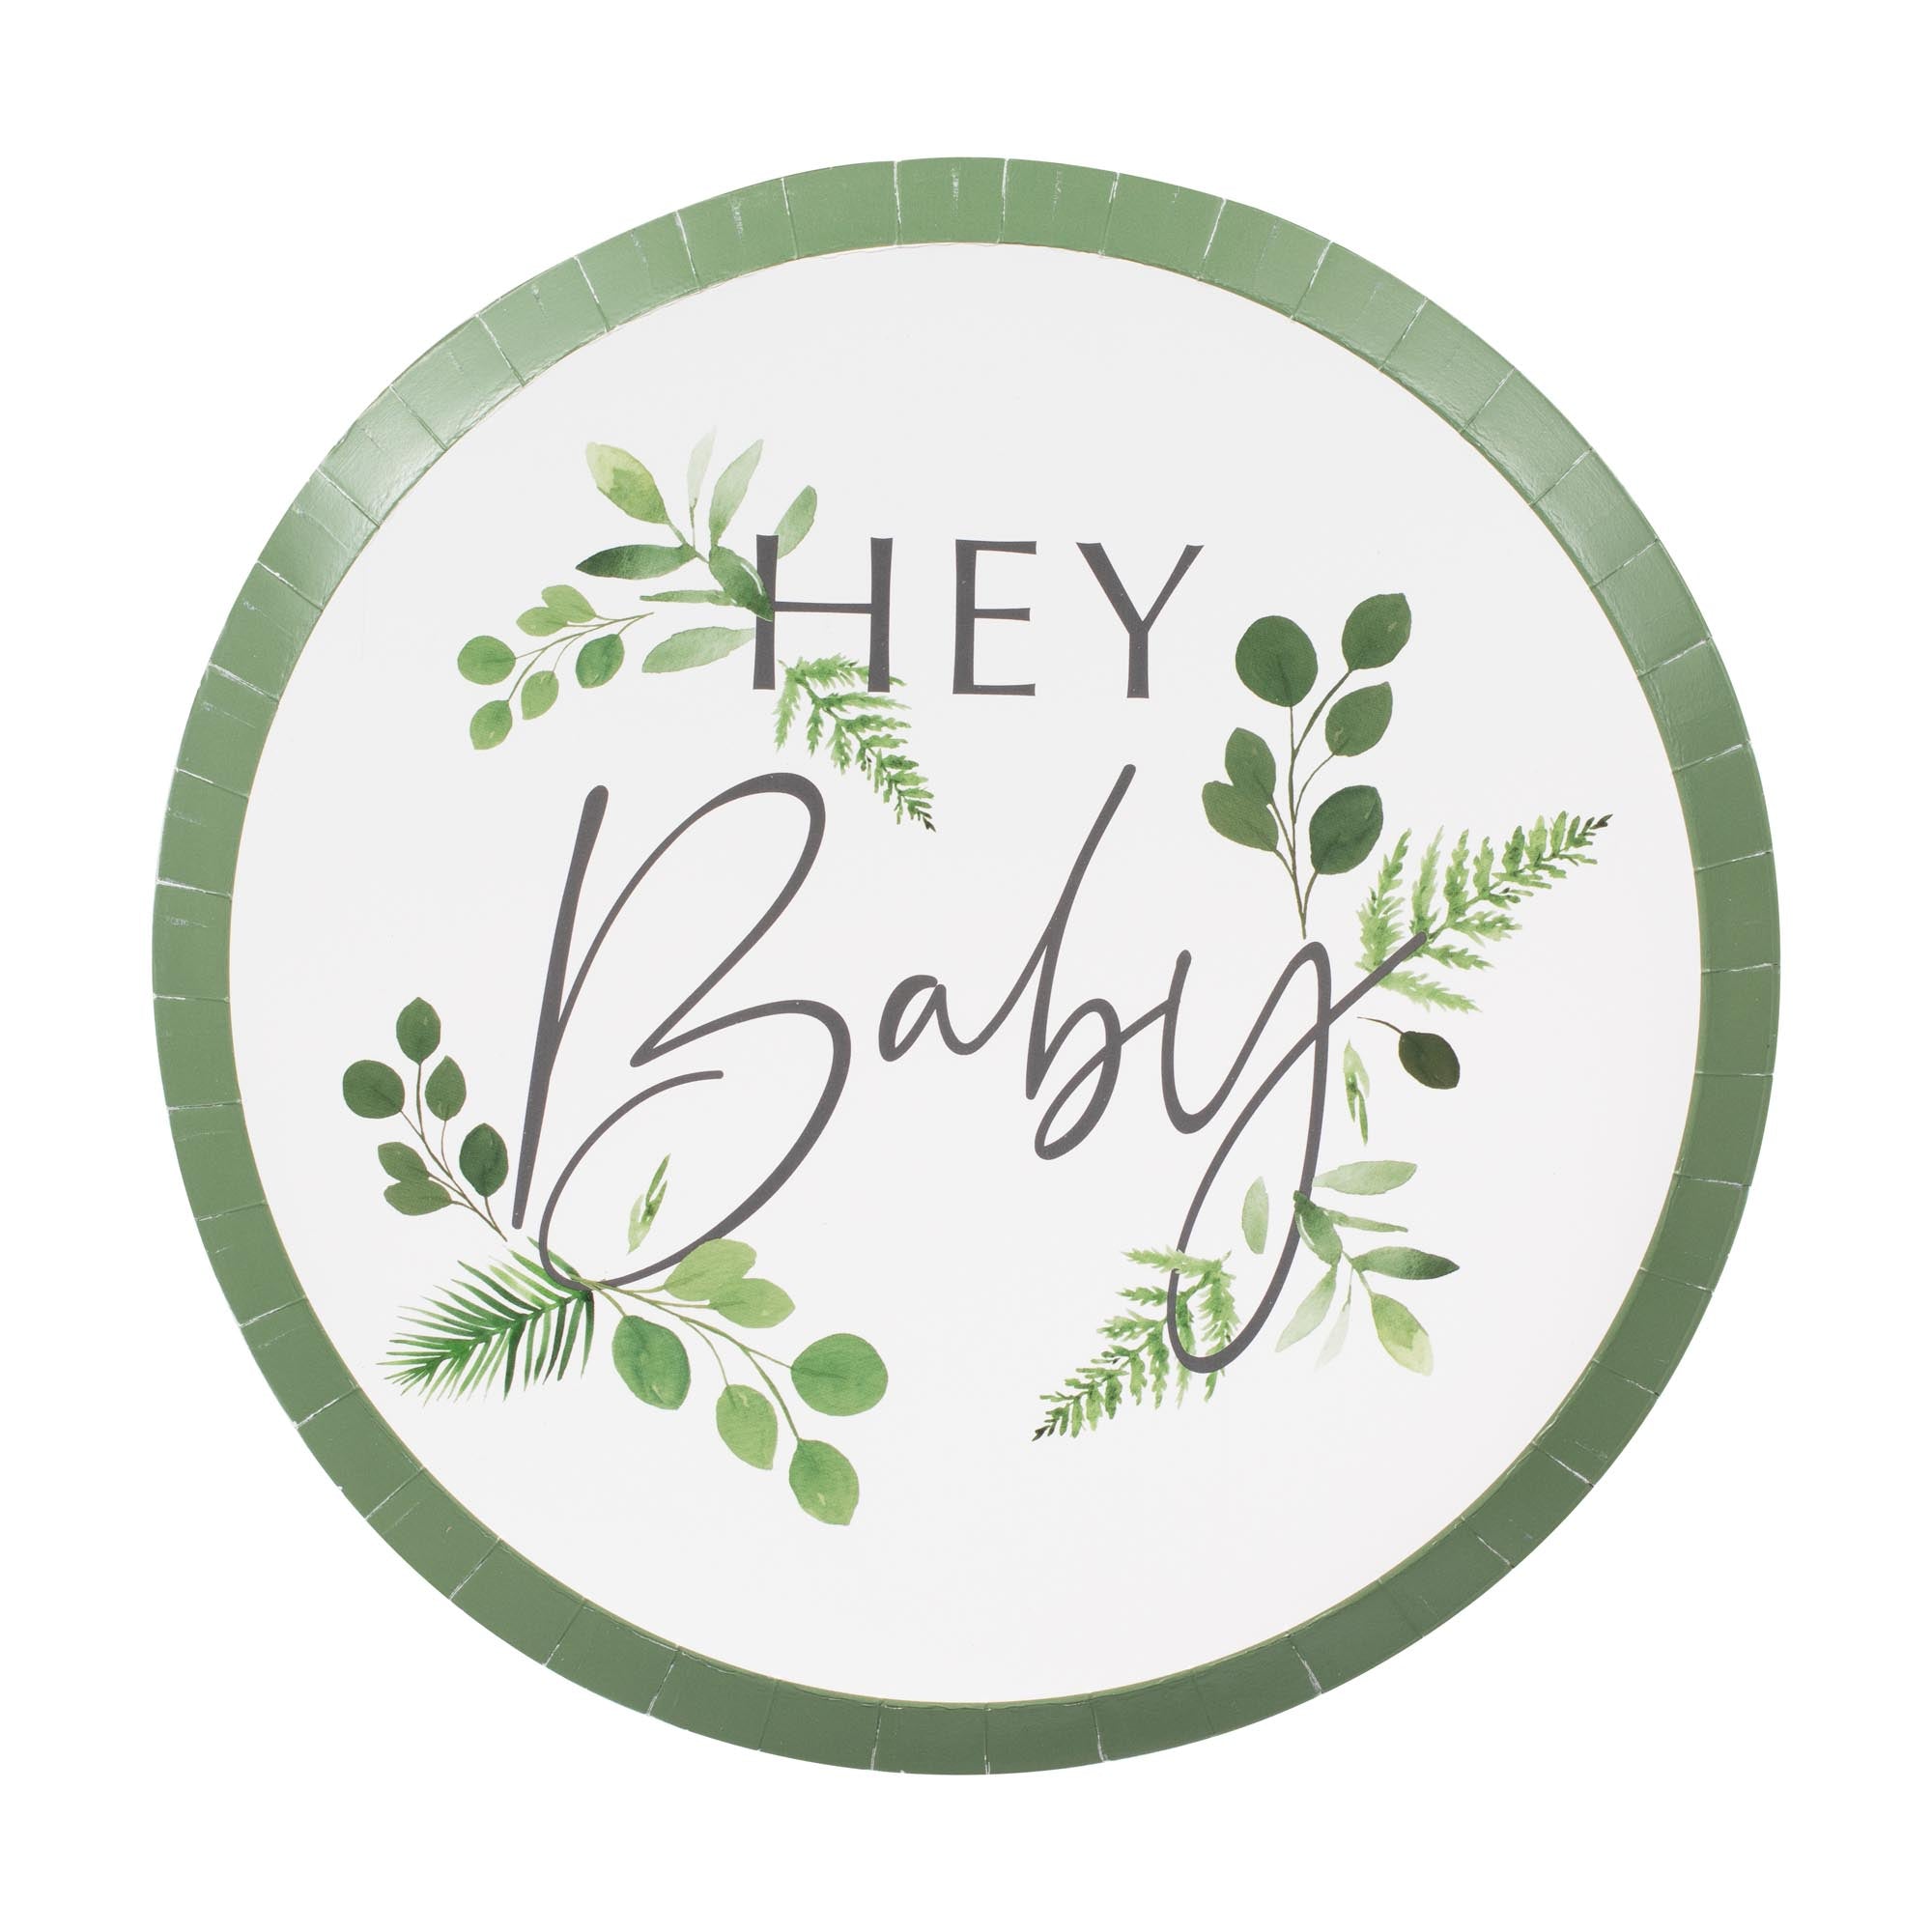 Botanical paper party plates with the words "hey baby" decorating the centre